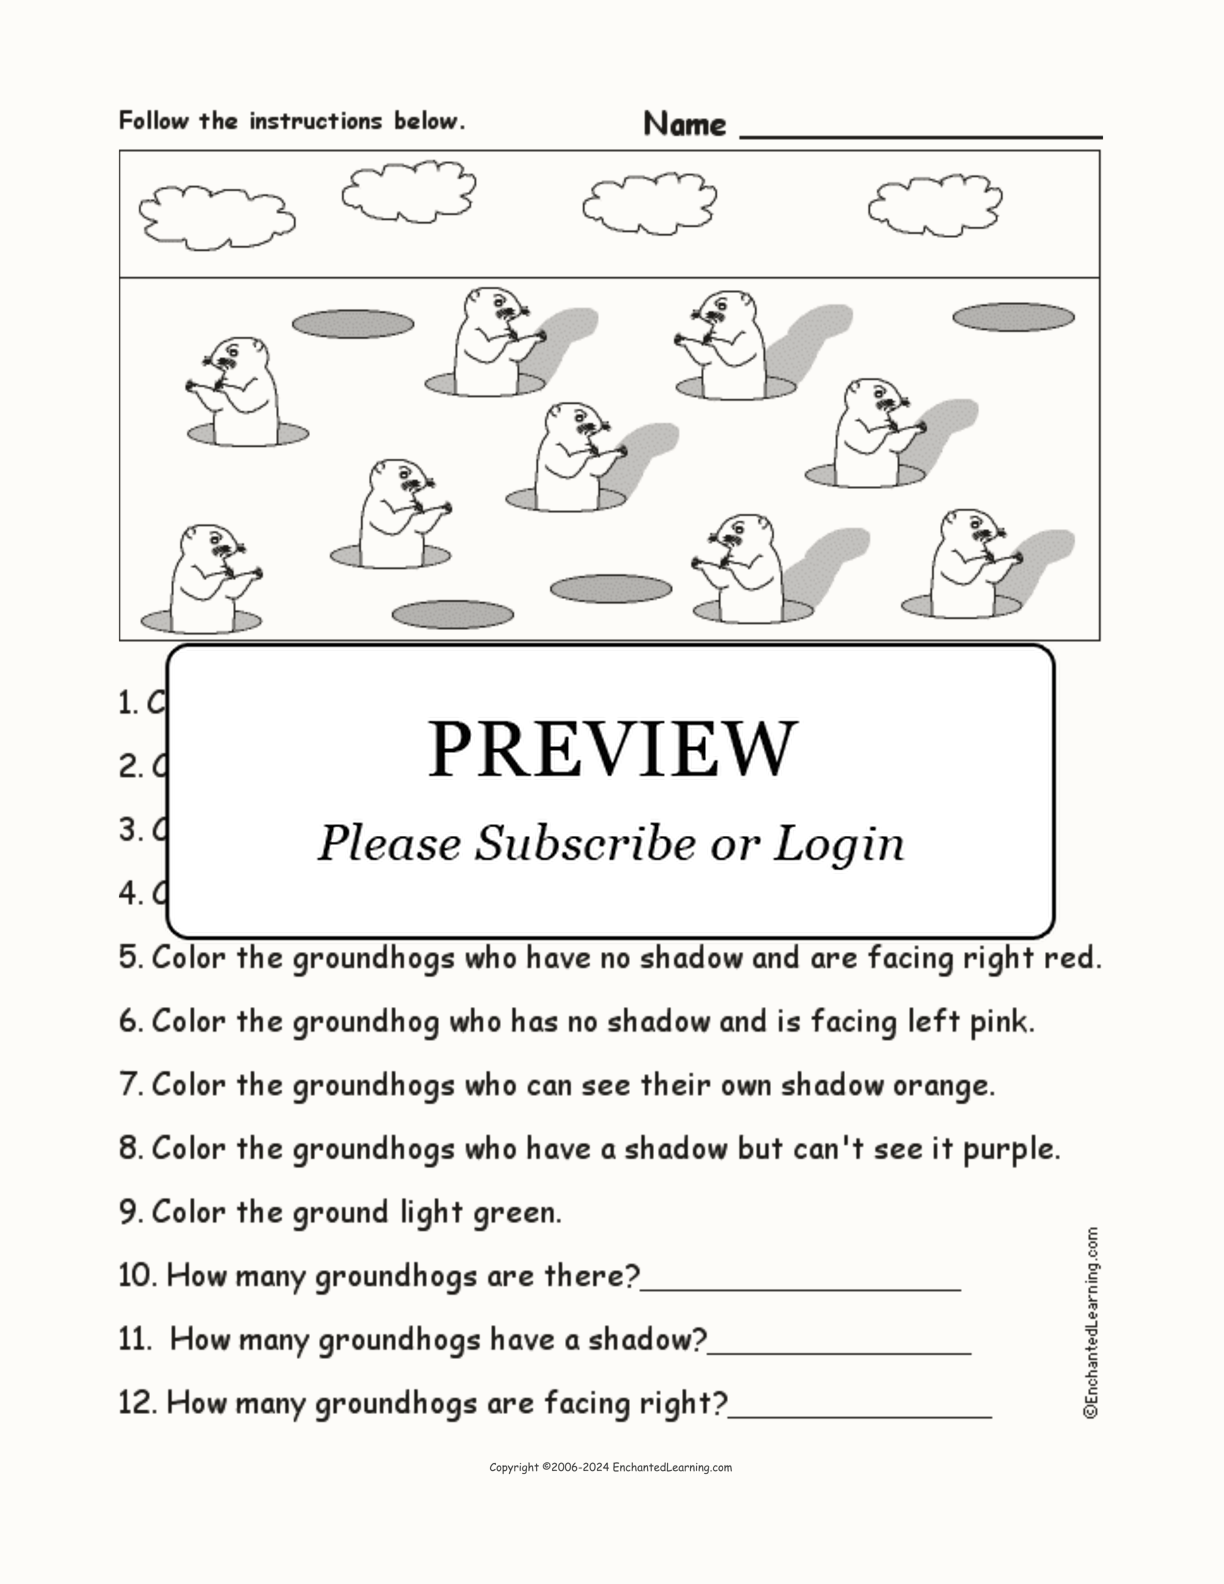 Groundhog Day - Follow the Instructions interactive worksheet page 1